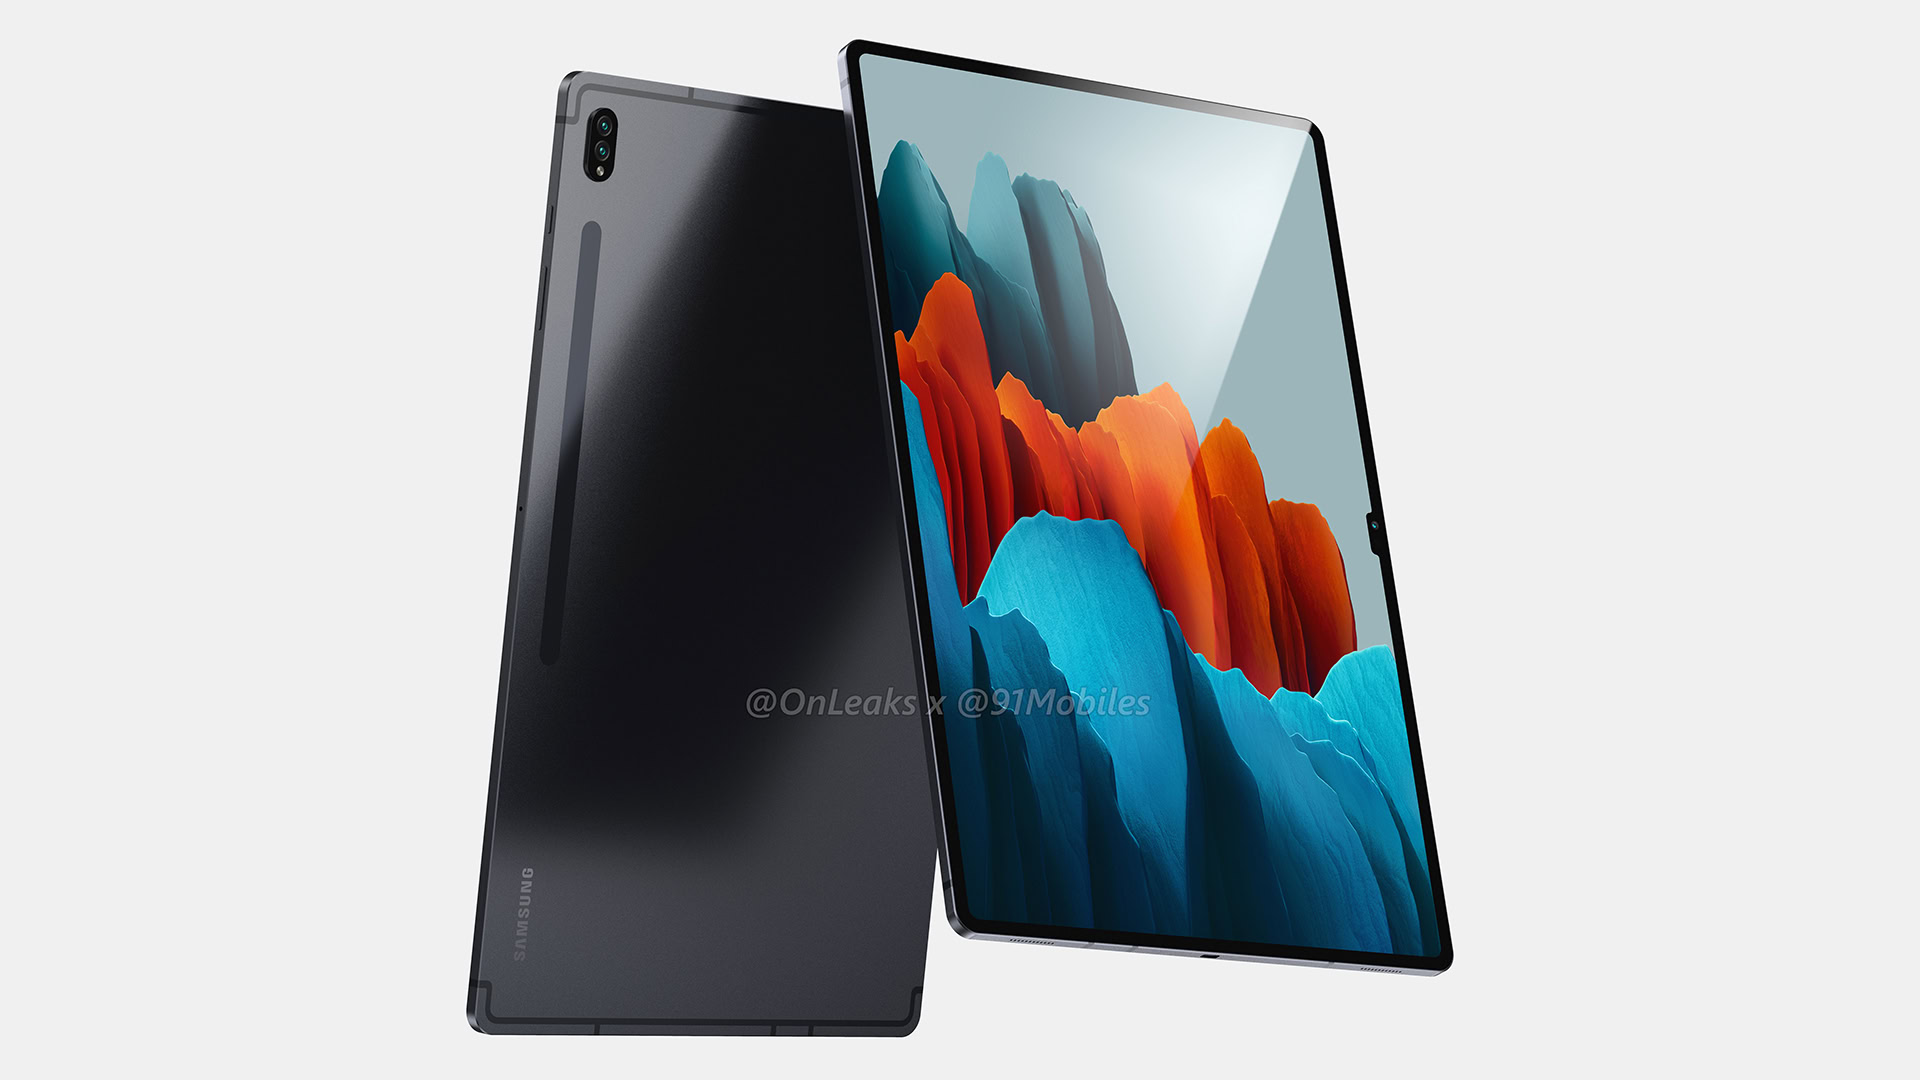 Here is a complete leaked specs table for the Galaxy Tab S8 series